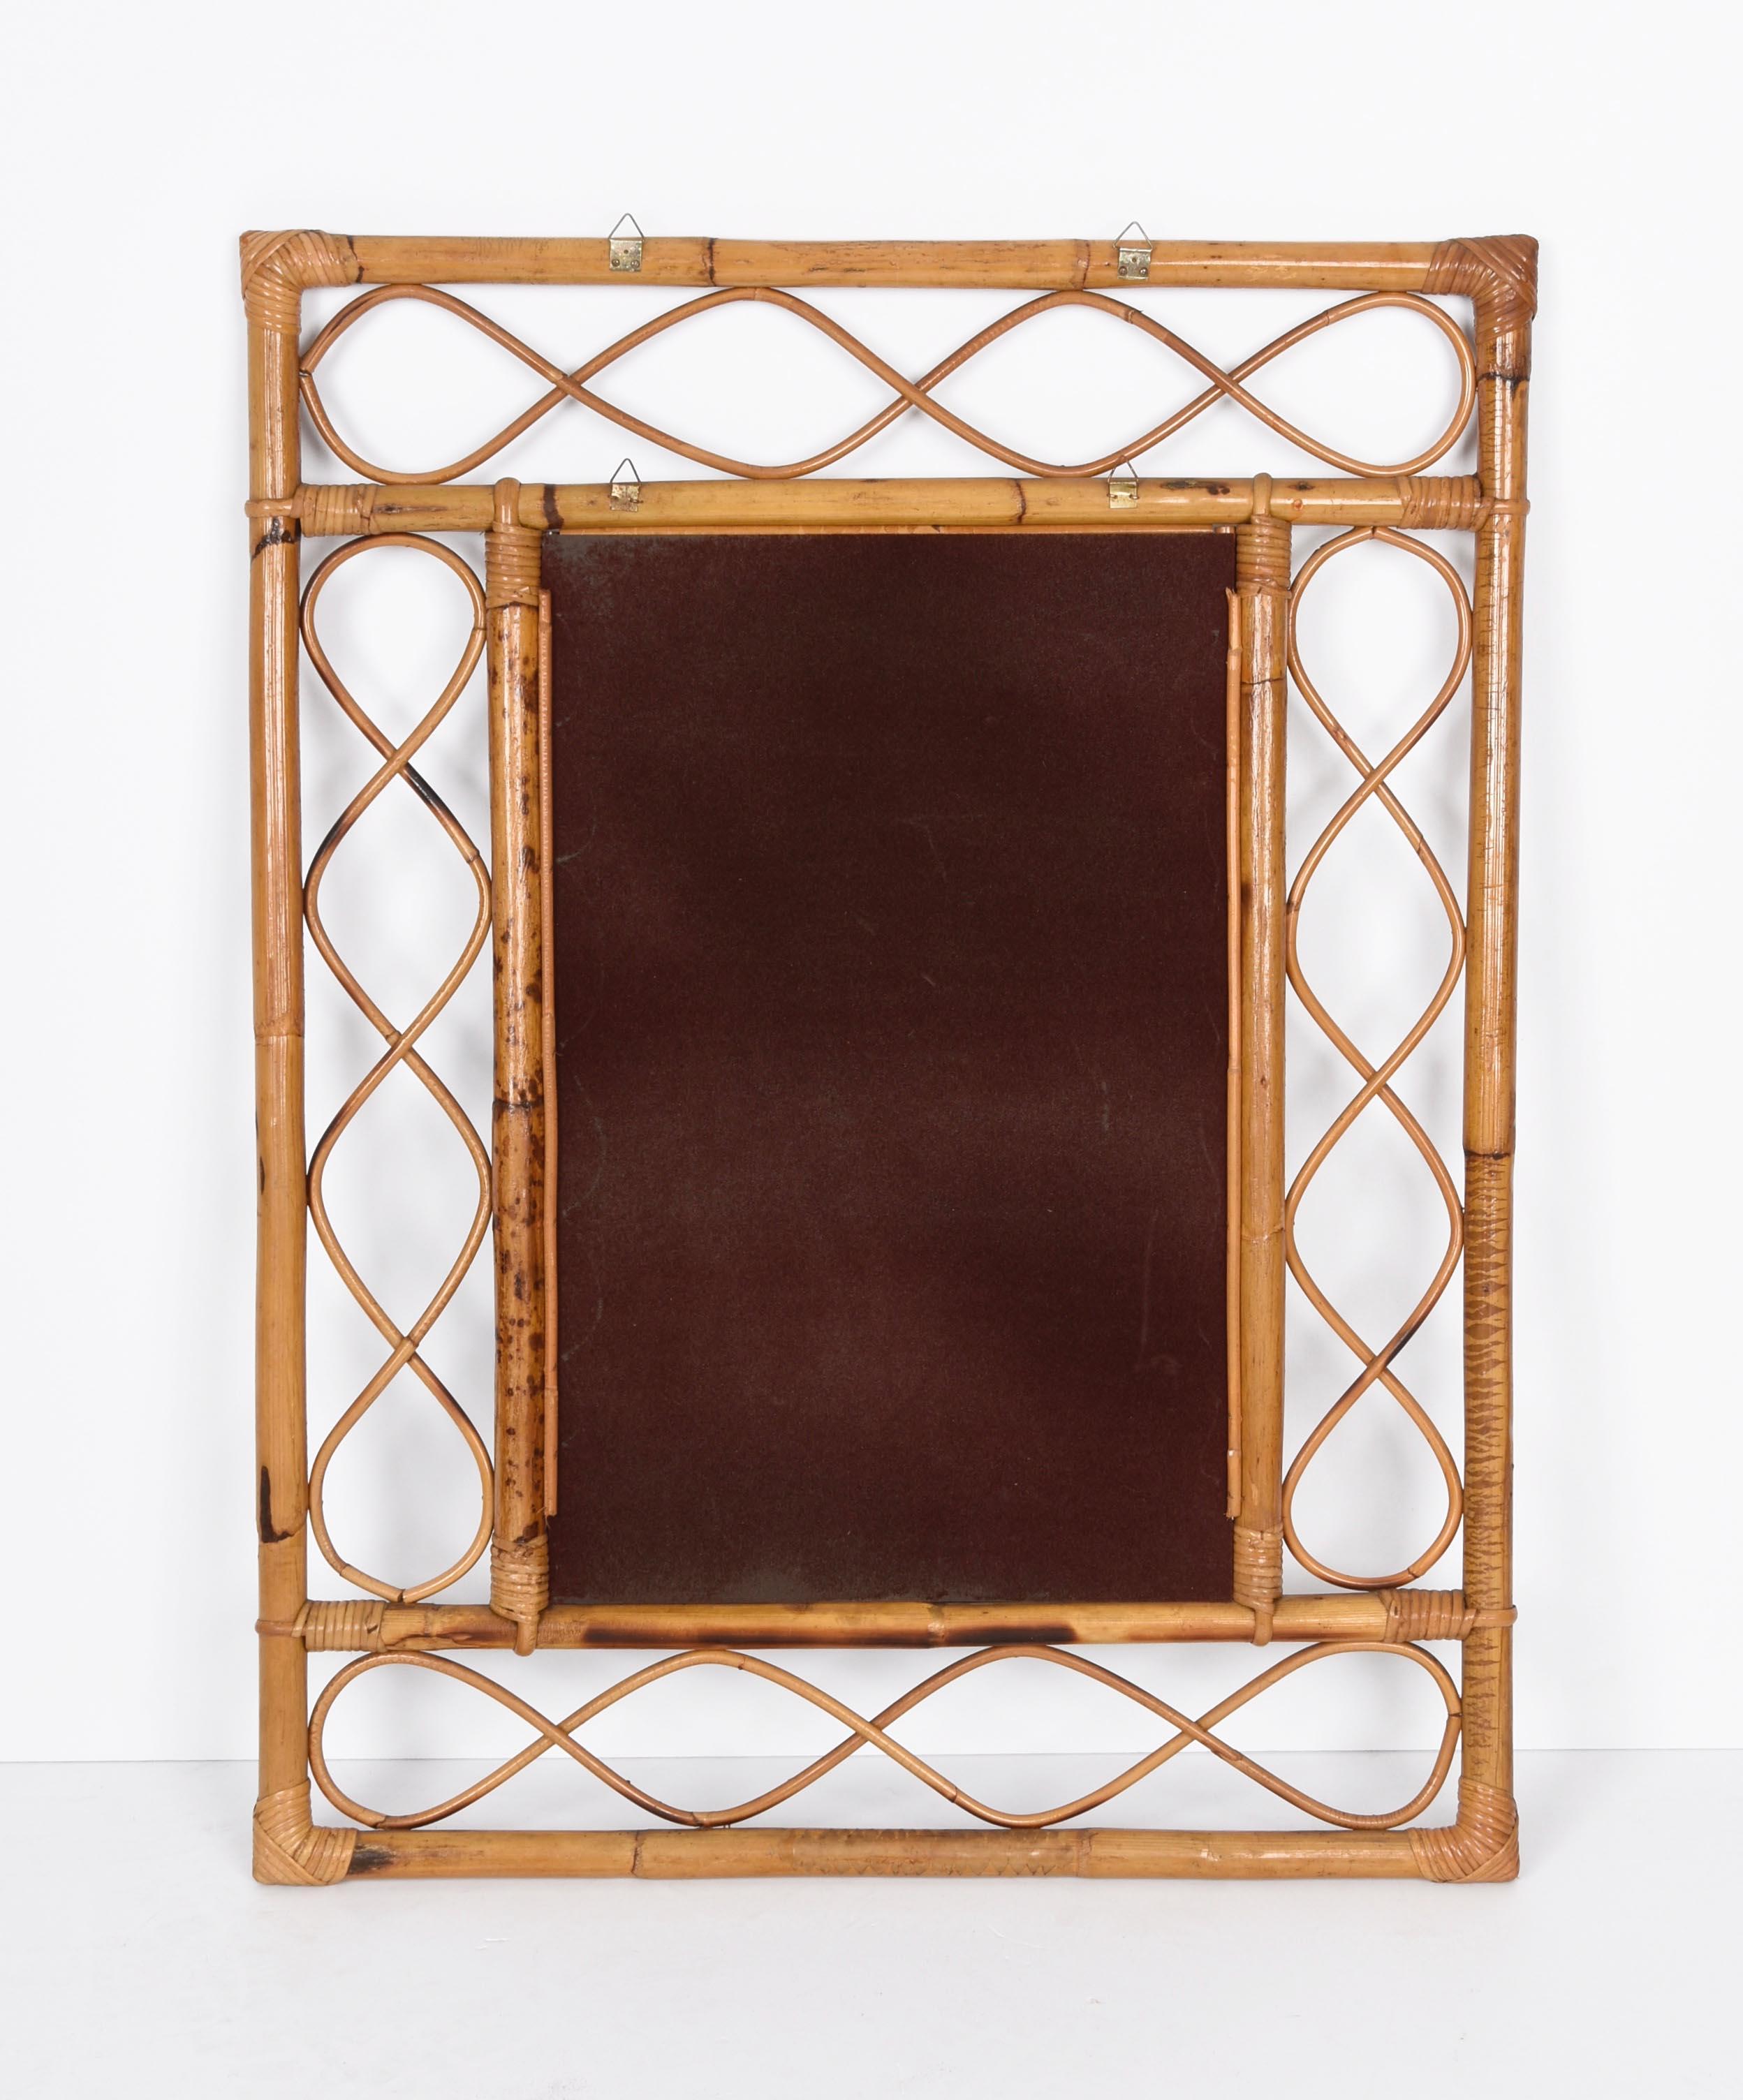 Midcentury French Riviera Bamboo and Rattan Rectangular Wall Mirror France 1960s 5